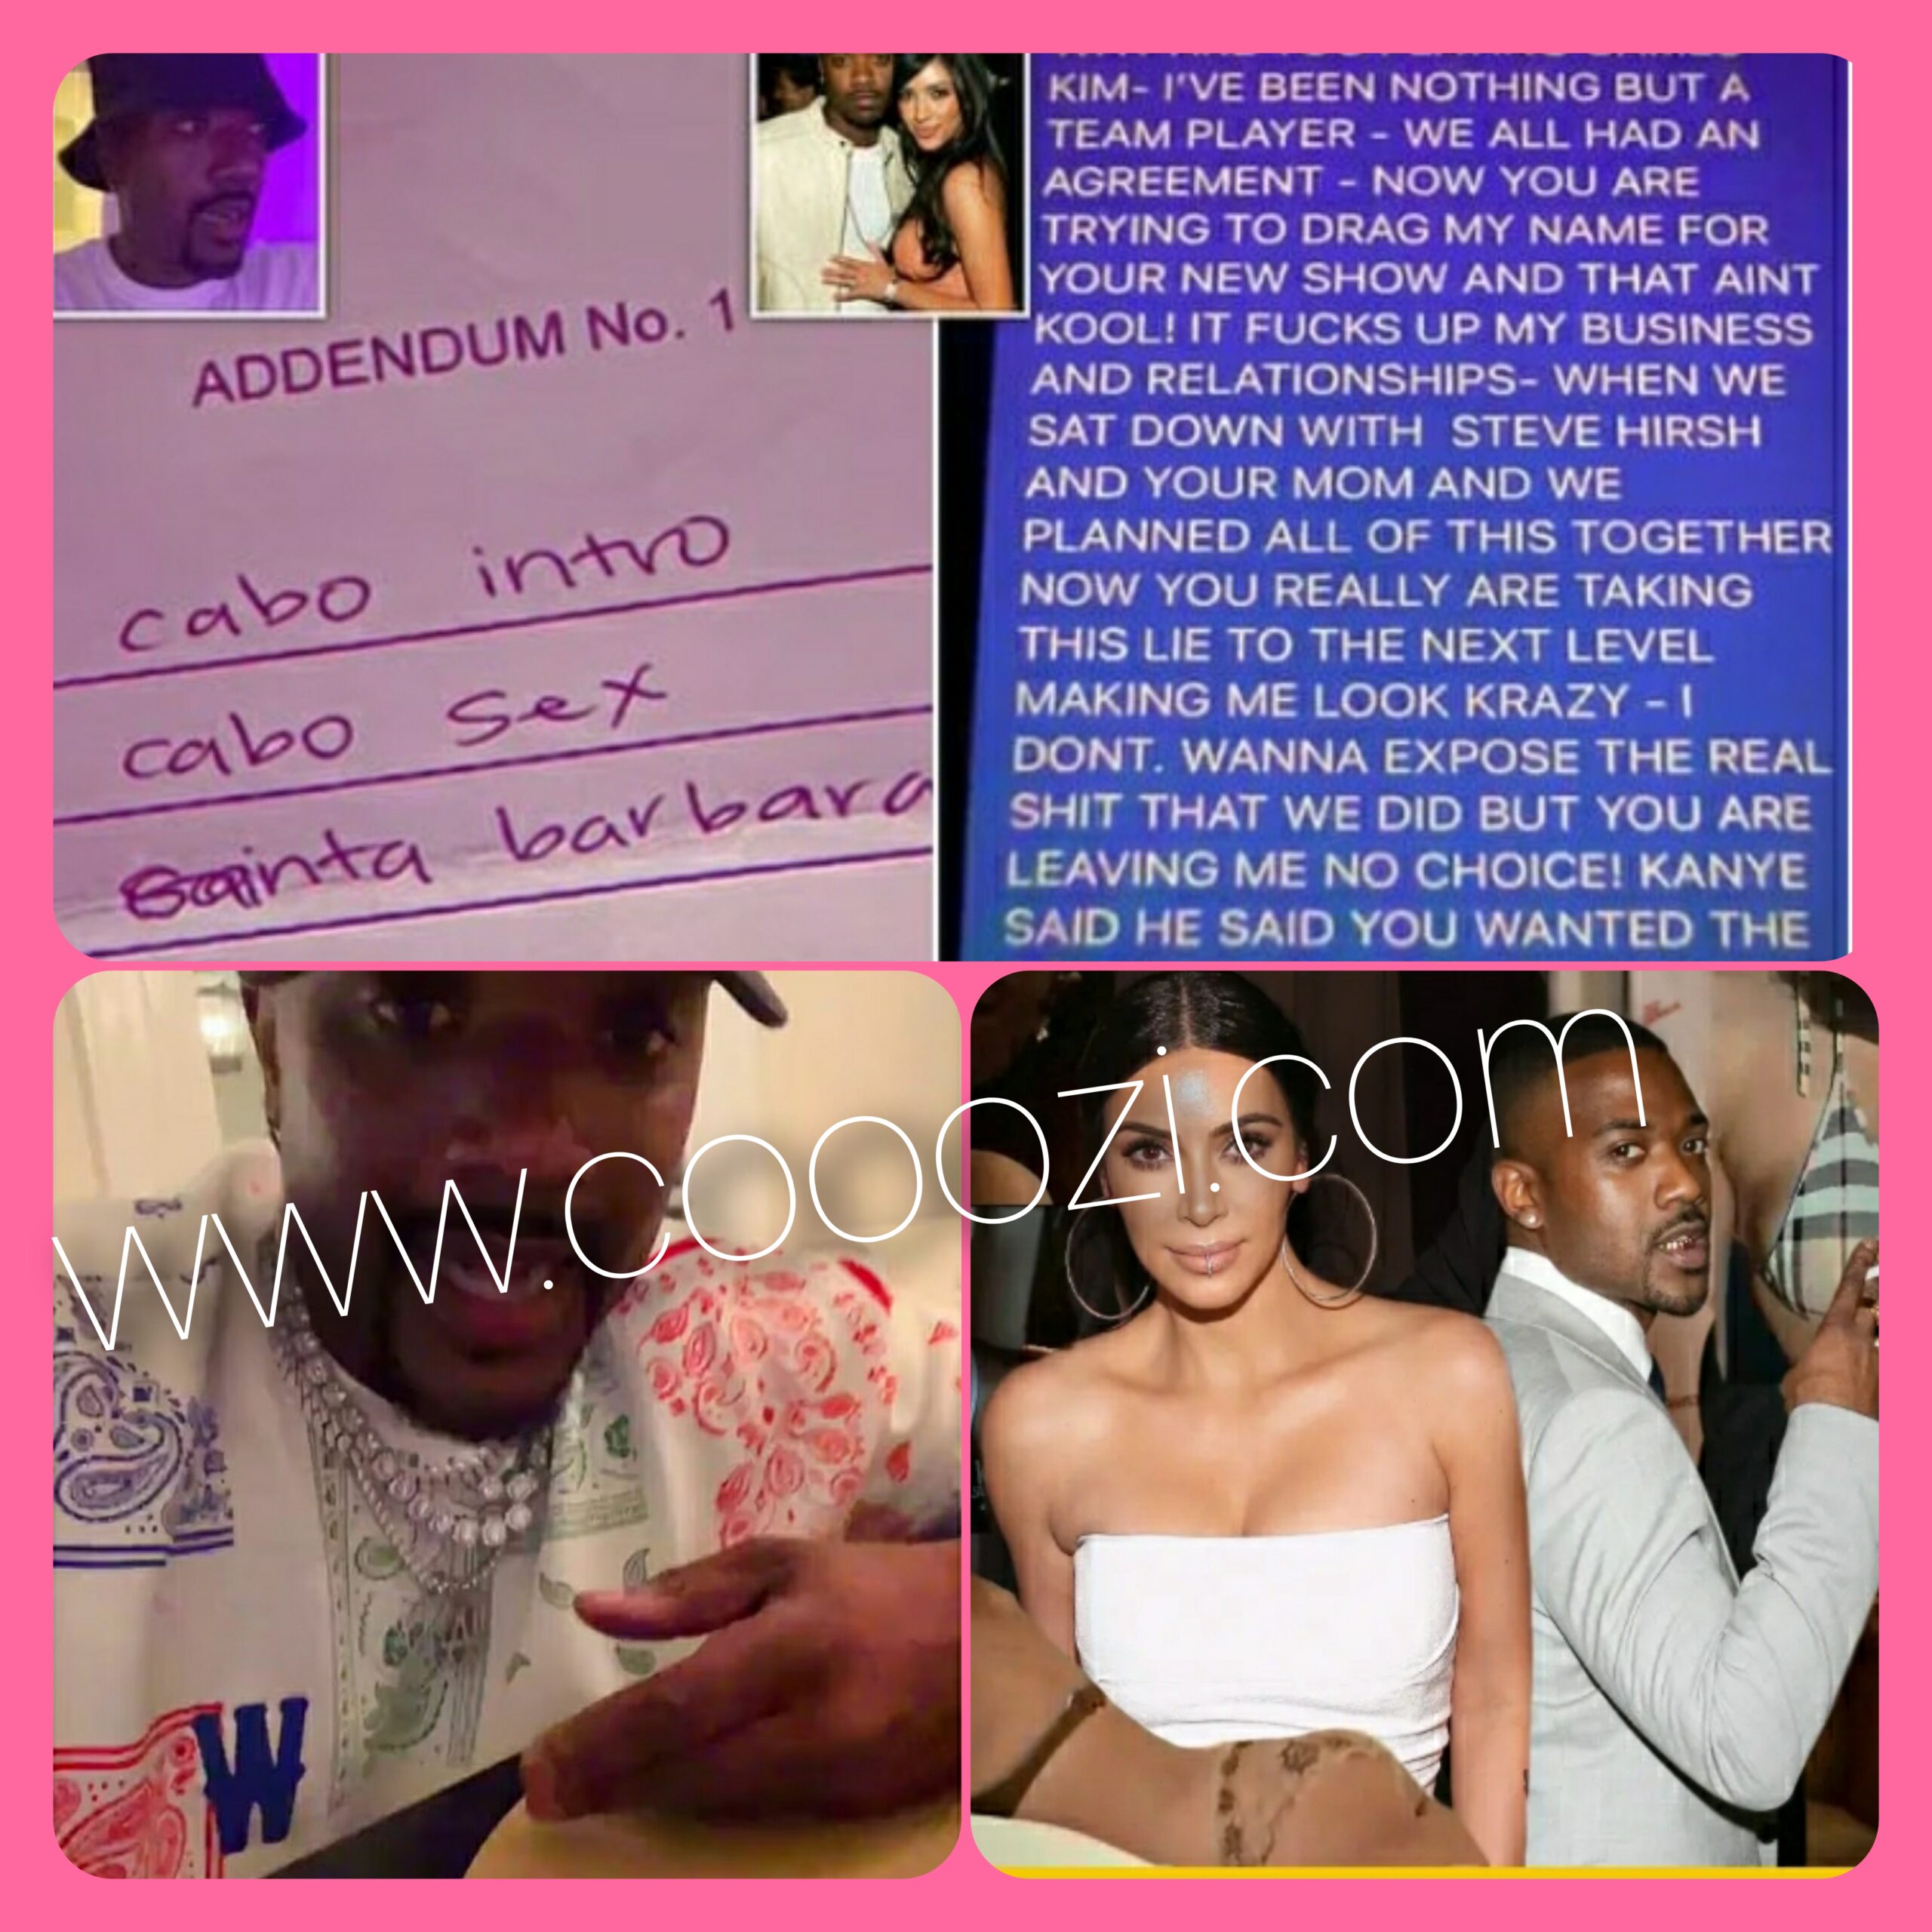 Ray J reveals his and Kim Kardashian’s s3x t@pe contract